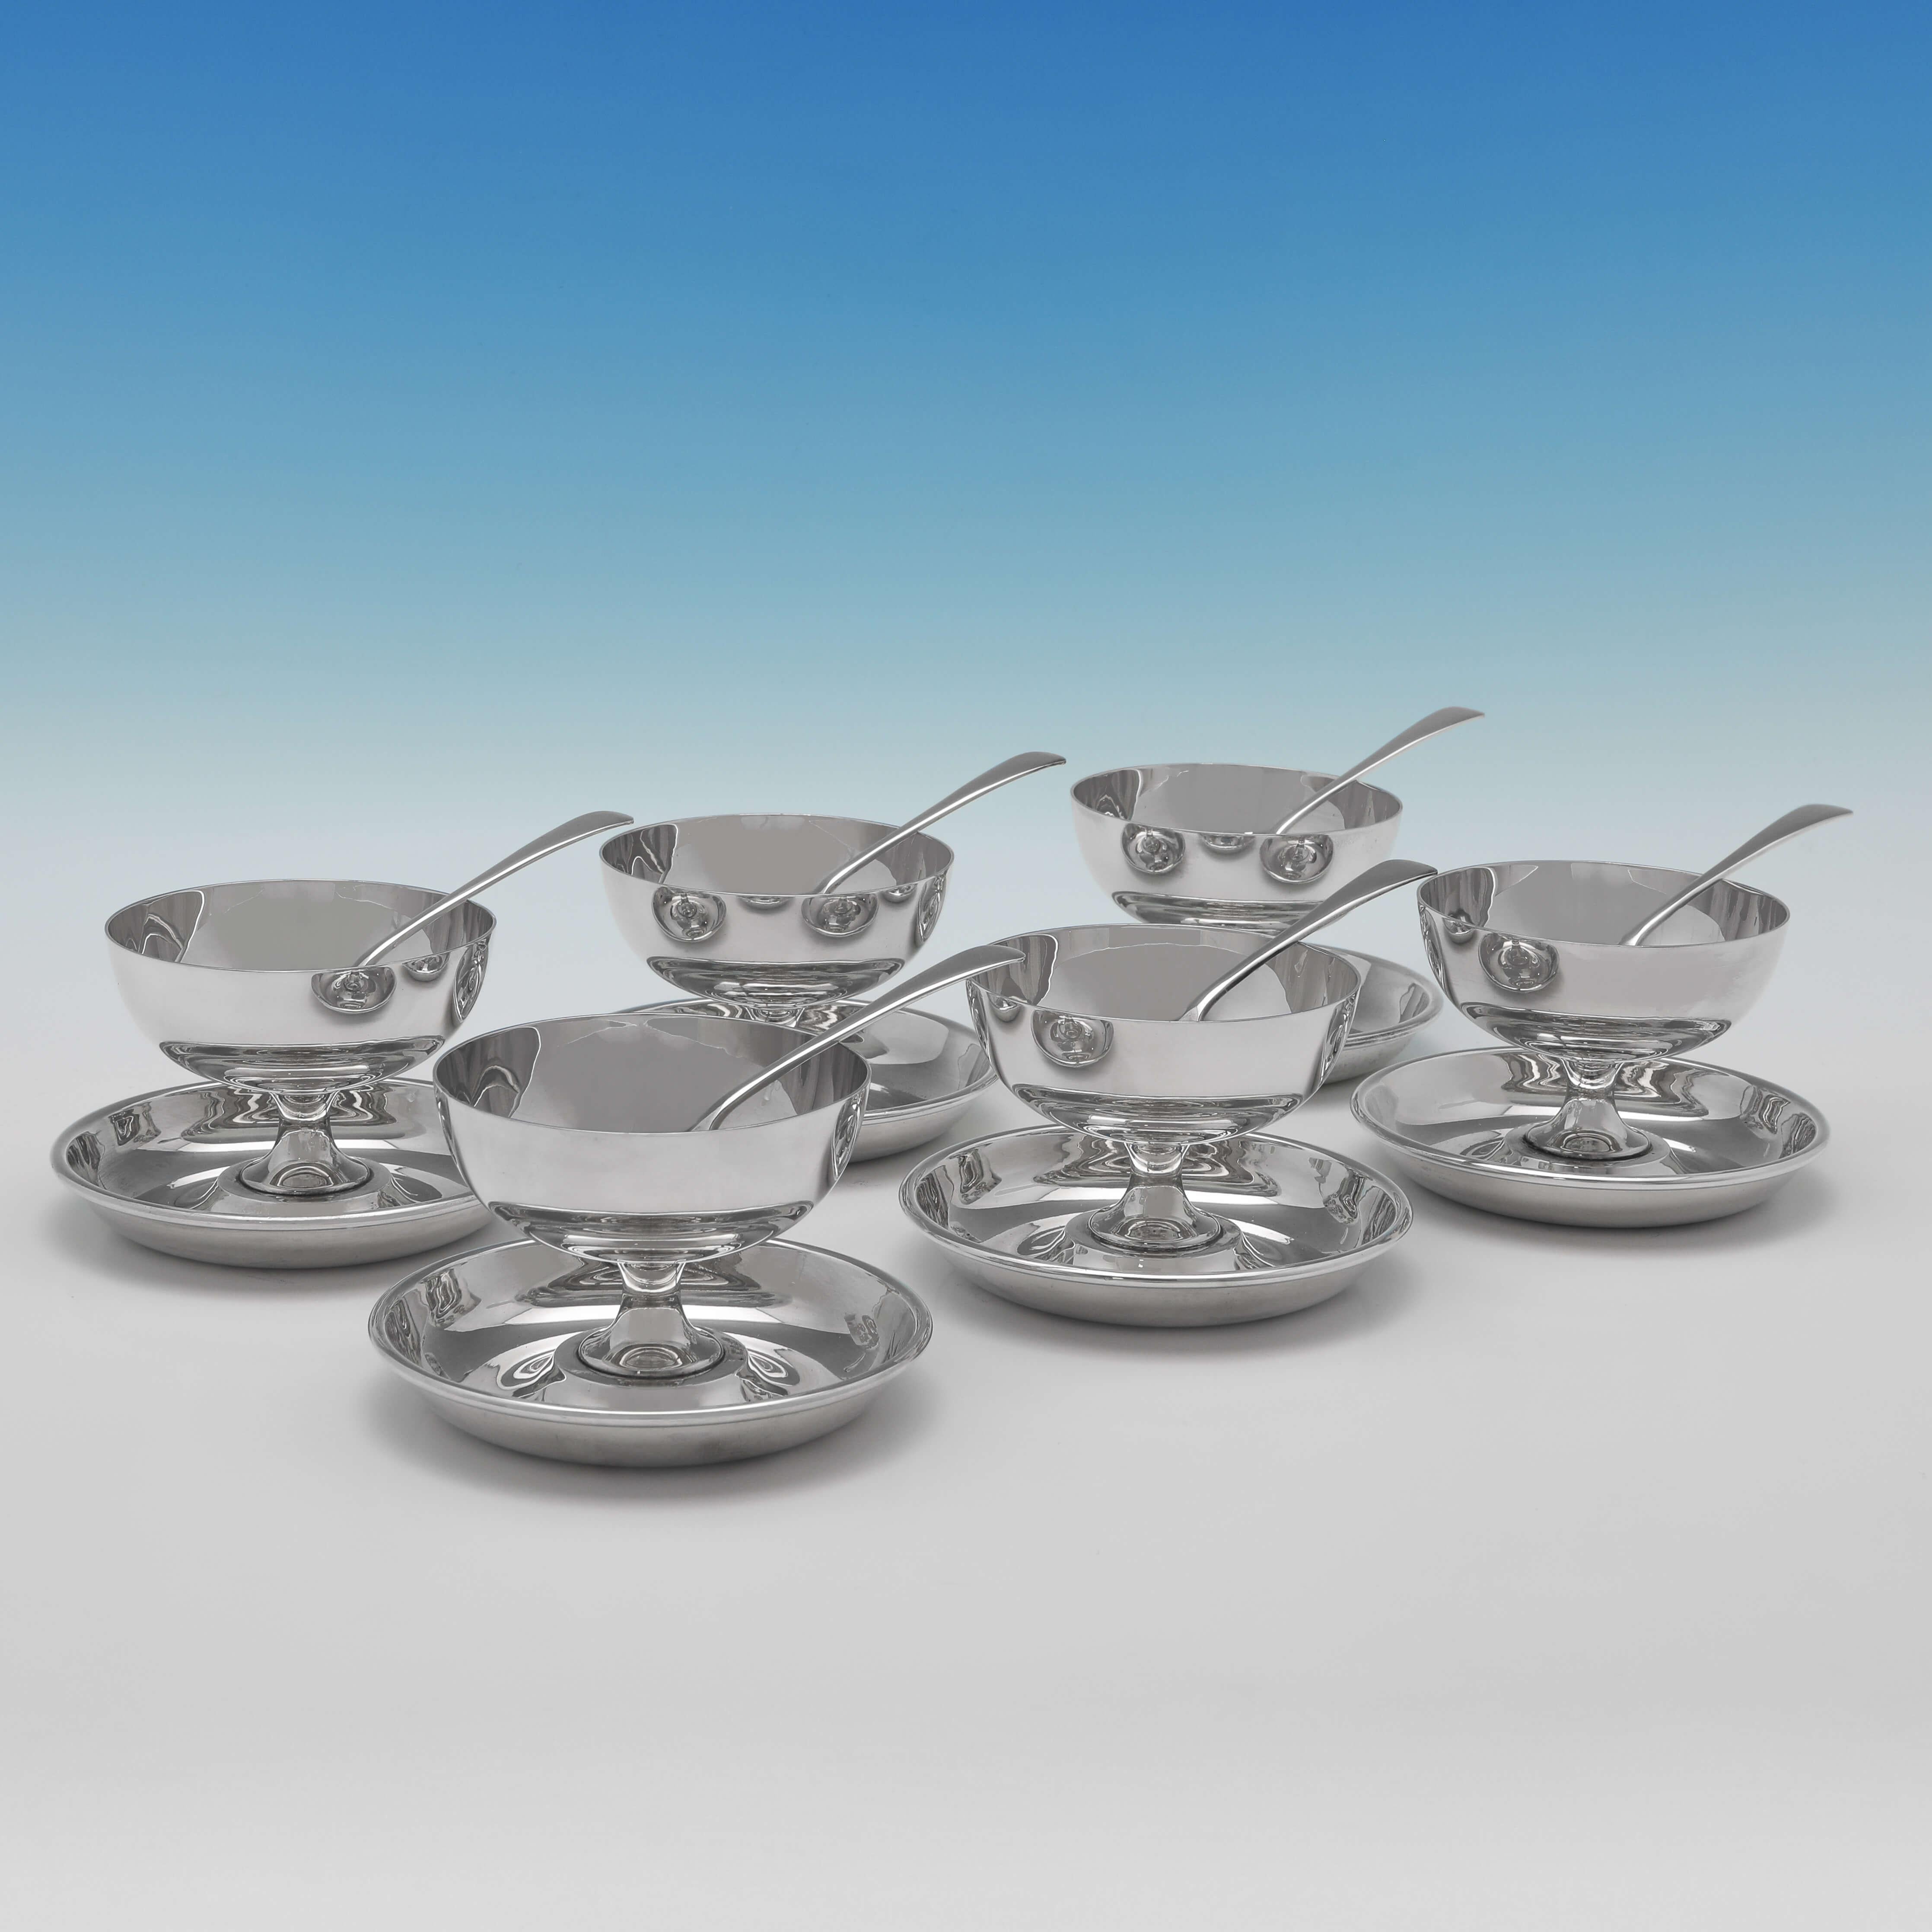 Hallmarked in Sheffield in 1927 by Walker & Hall, this very stylish set of 6, sterling silver grapefruit bowls & spoons, are presented in their original box, and are in the Art Deco taste. Each bowl measures 3